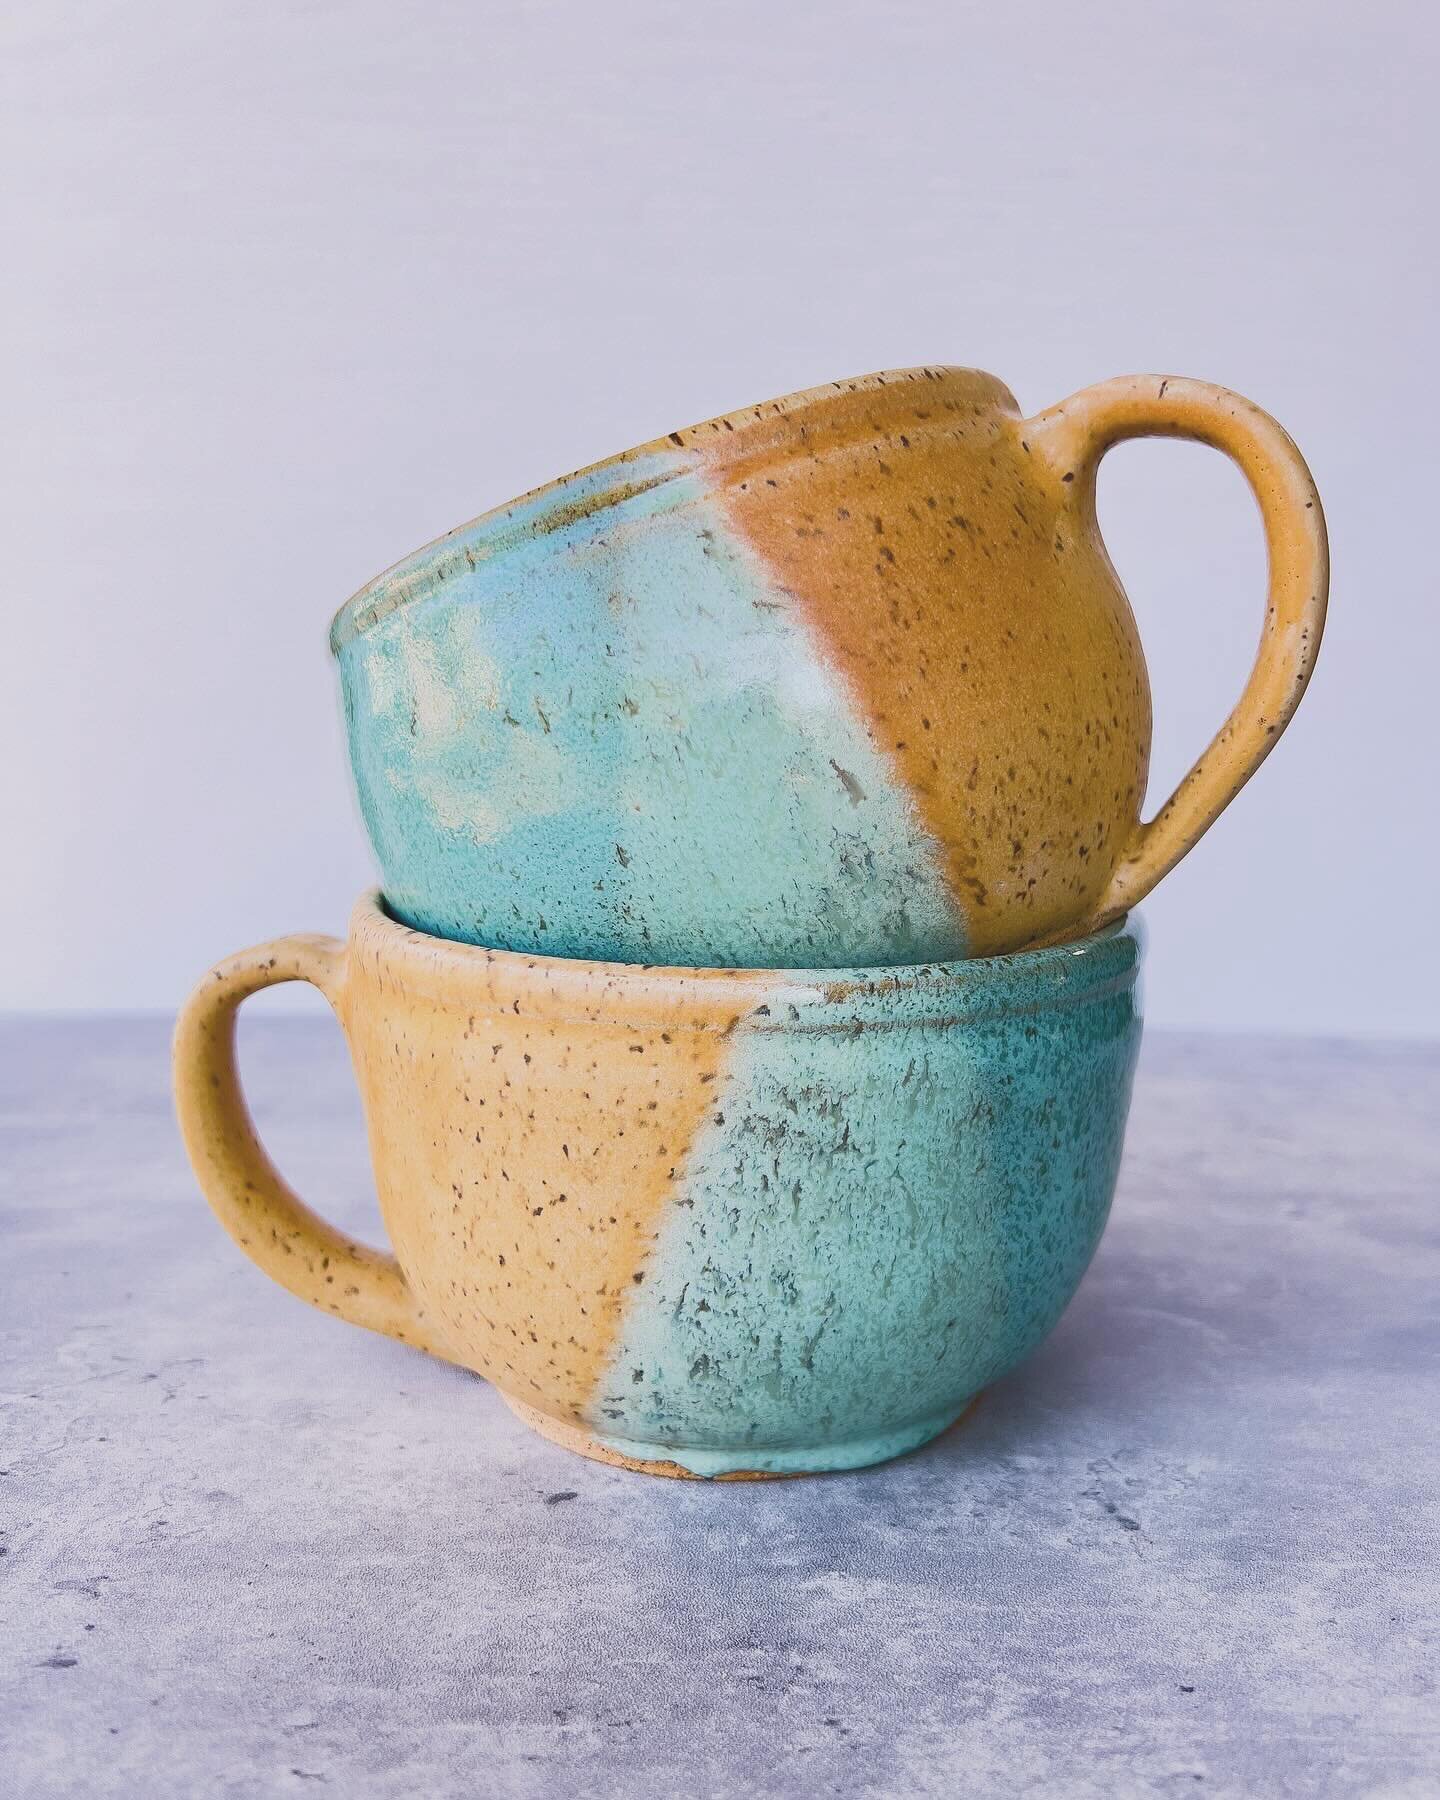 I just can&rsquo;t get over the beauty of this glaze combination. I can&rsquo;t decide if it should be called breaking waves or sand and sea. 🌊 ⏳🐚 What do you think? 

#oceanlovers #breakingwaves #handmadepottery #ceramicsstudio #charlestonlife #ha